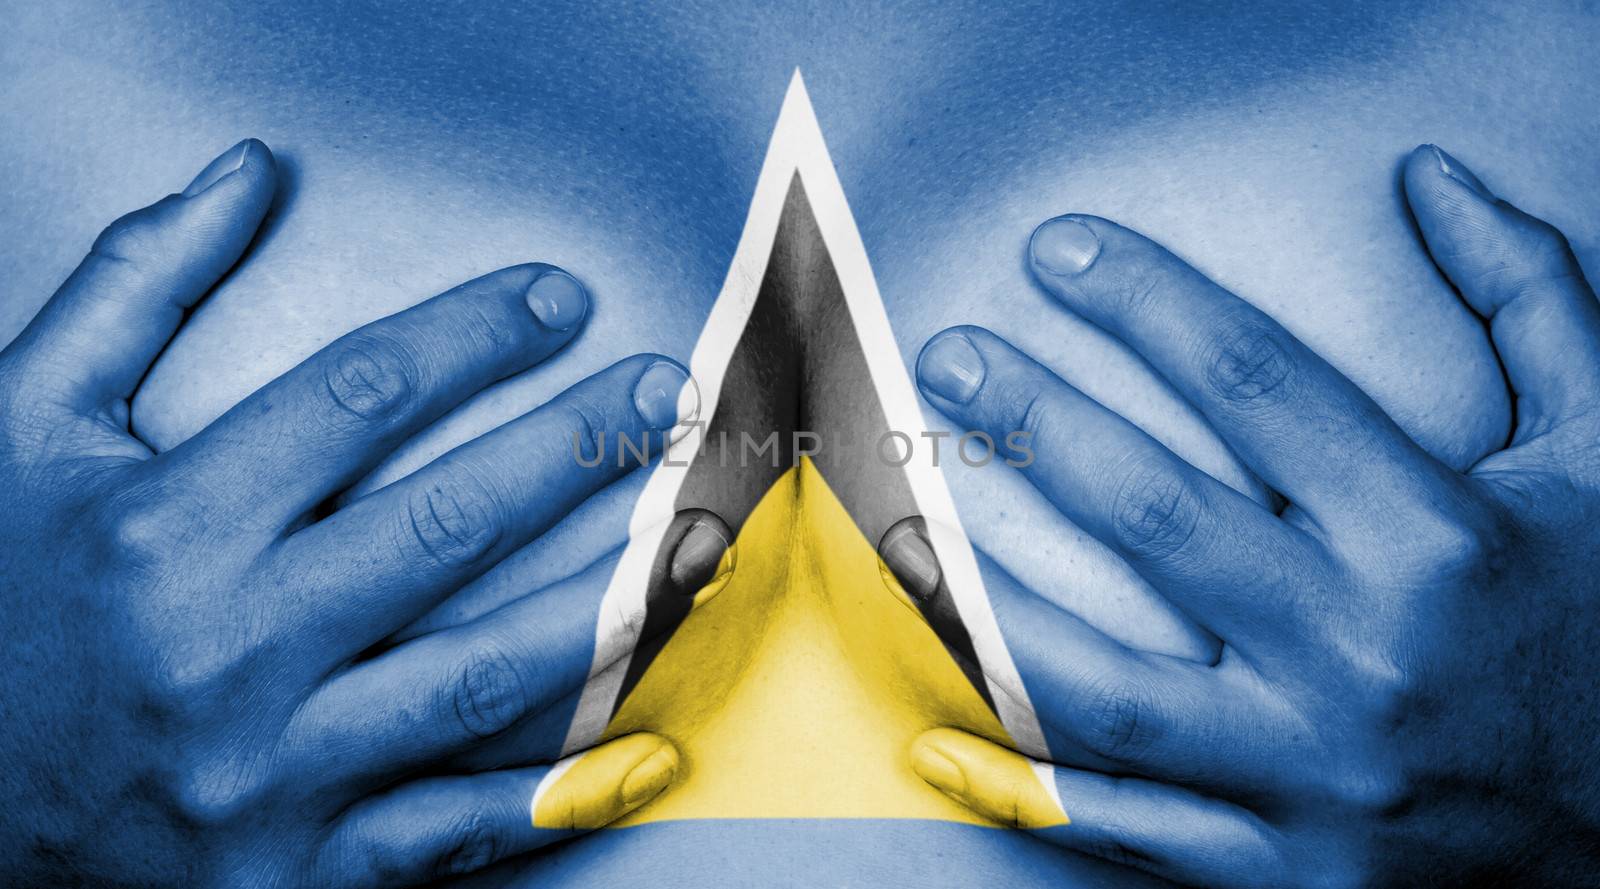 Upper part of female body, hands covering breasts, flag of Saint Lucia